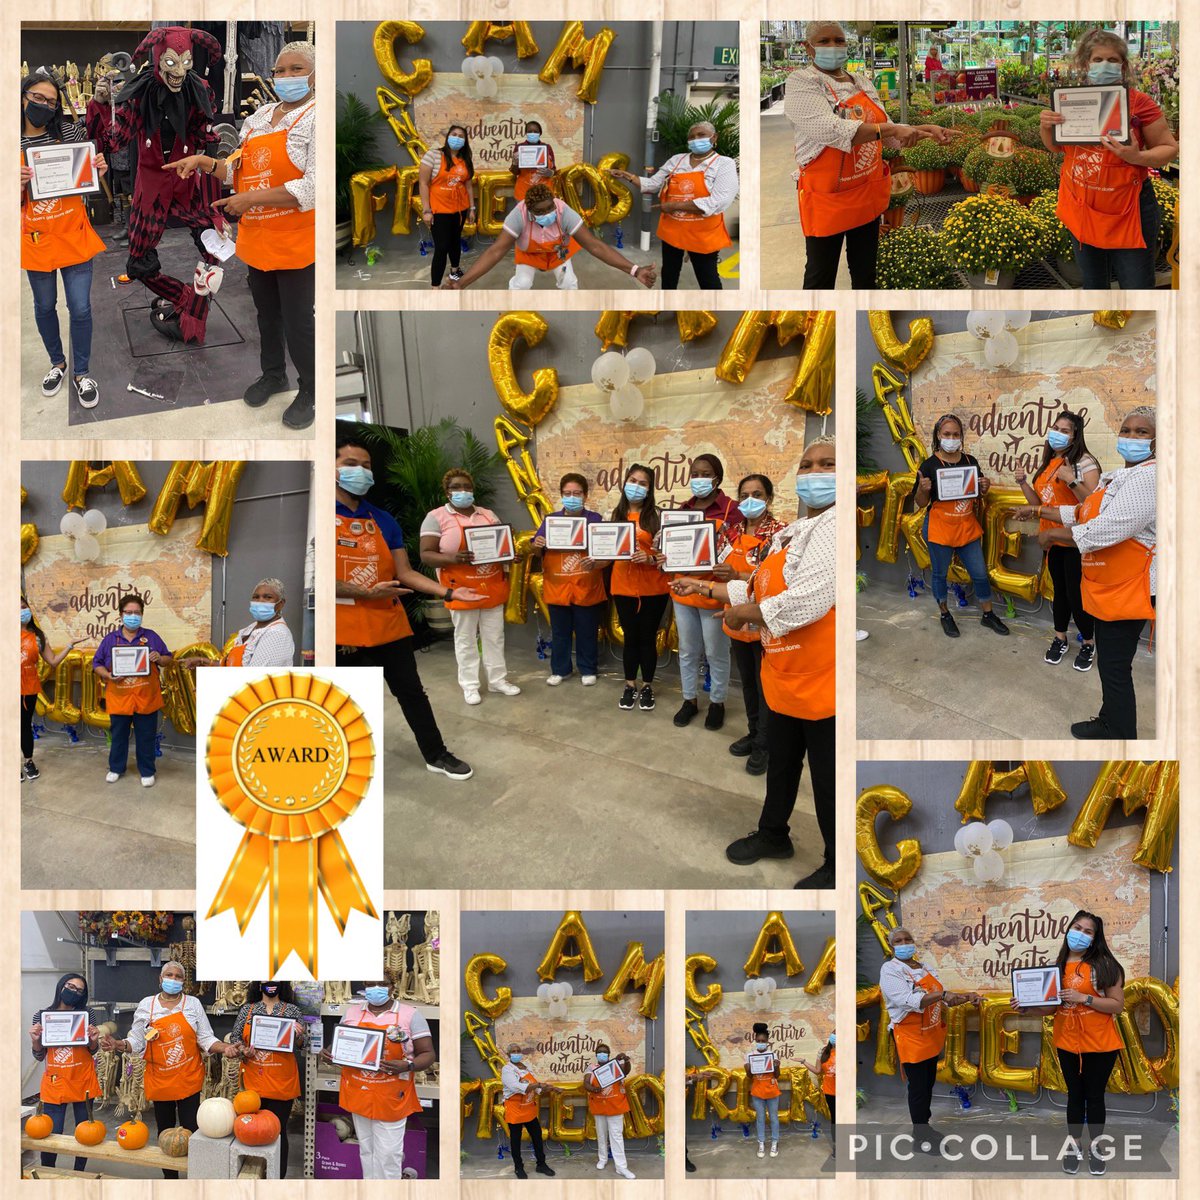 AWARDS for our Front End Super Stars 🏆🏆🏆! CAM and FRIENDS celebration continues at 6310 #AroundTheWorld #sayingthankyou @Tayonewelsh @ArgeoTamayo @Cece0806thd @District266 @NargisRamasami